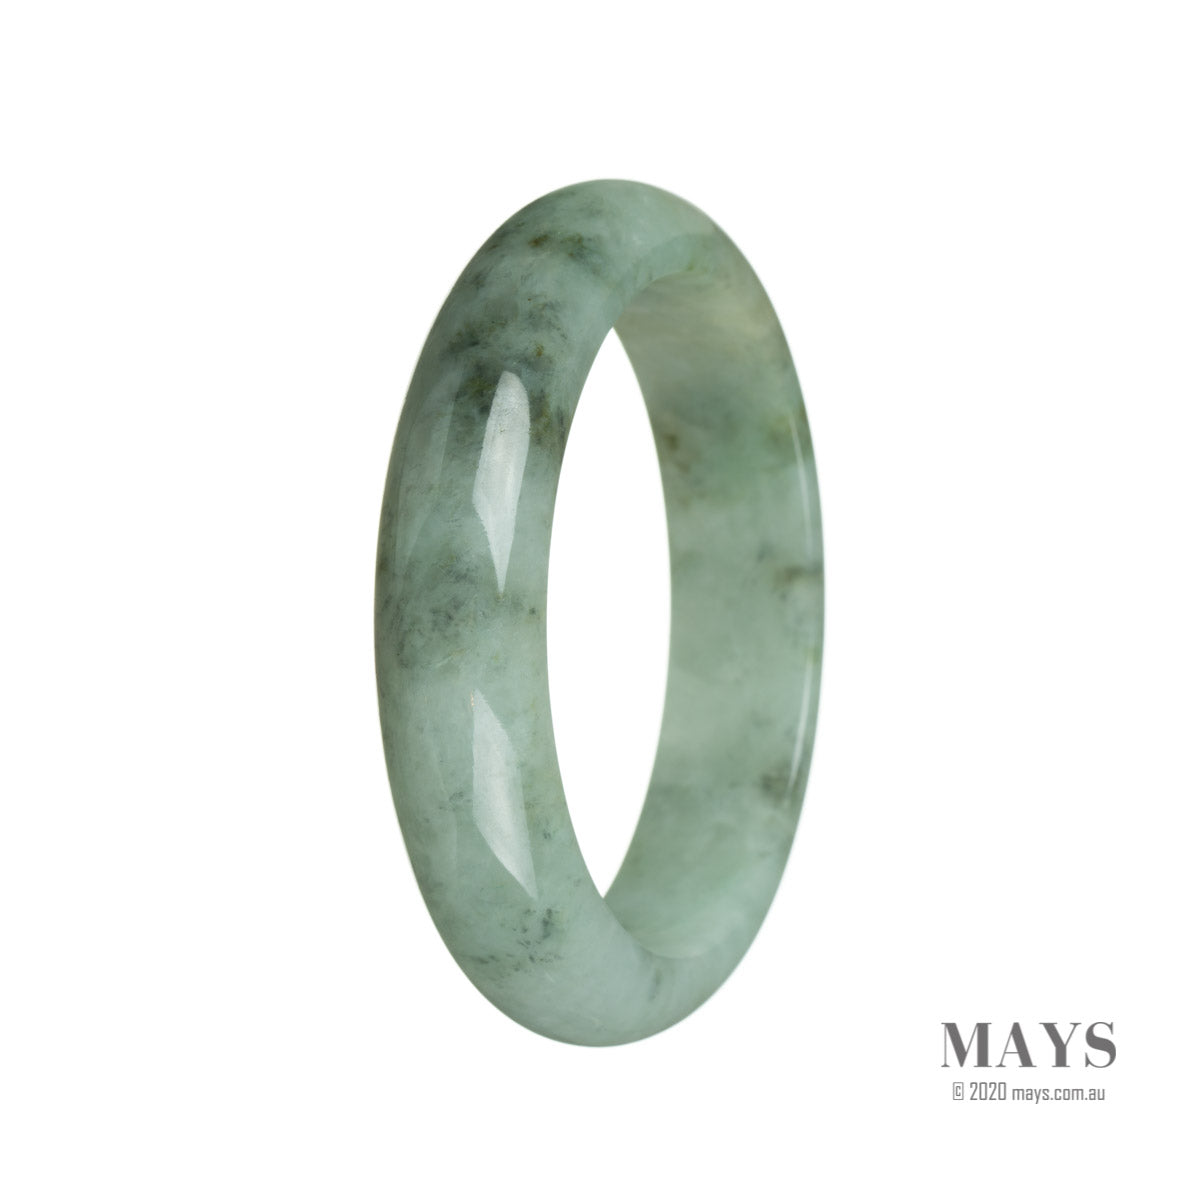 An image of a green traditional jade bangle with a half-moon shape, measuring 60mm in size. This bangle is made of authentic grade A jade and is from the brand MAYS™.